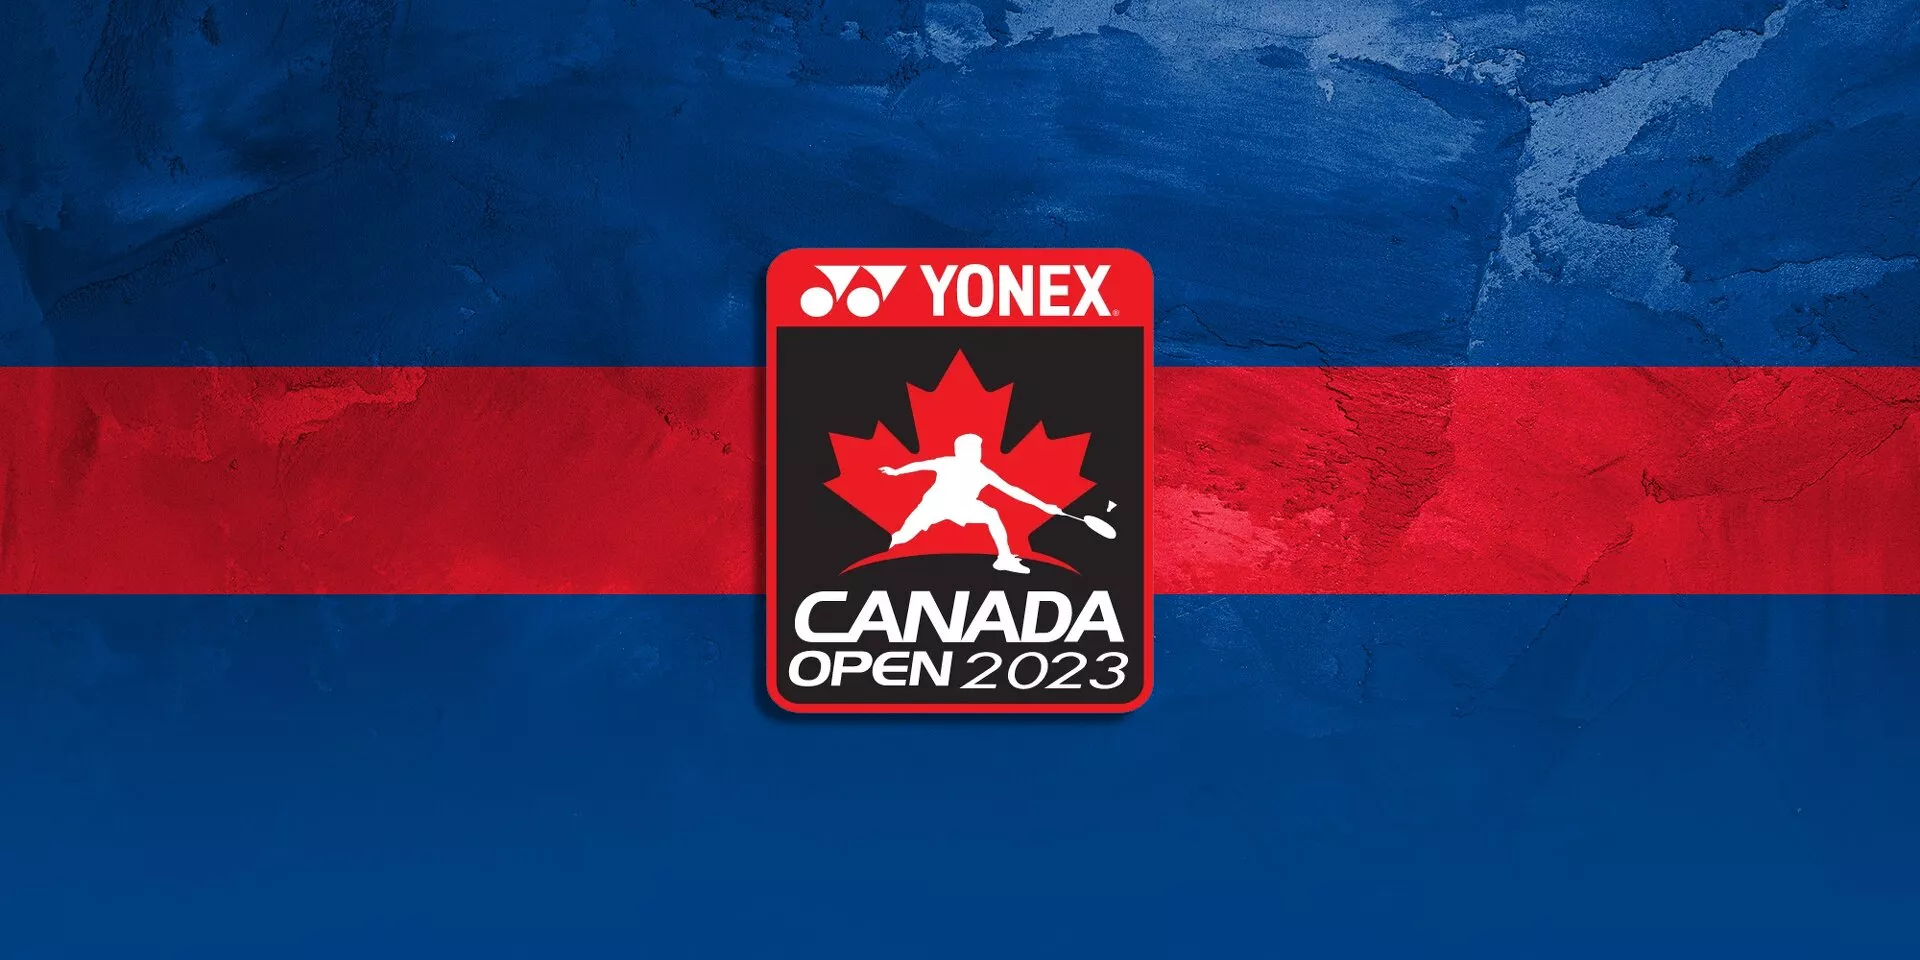 Where and how to watch Canada Open 2023 live in India?